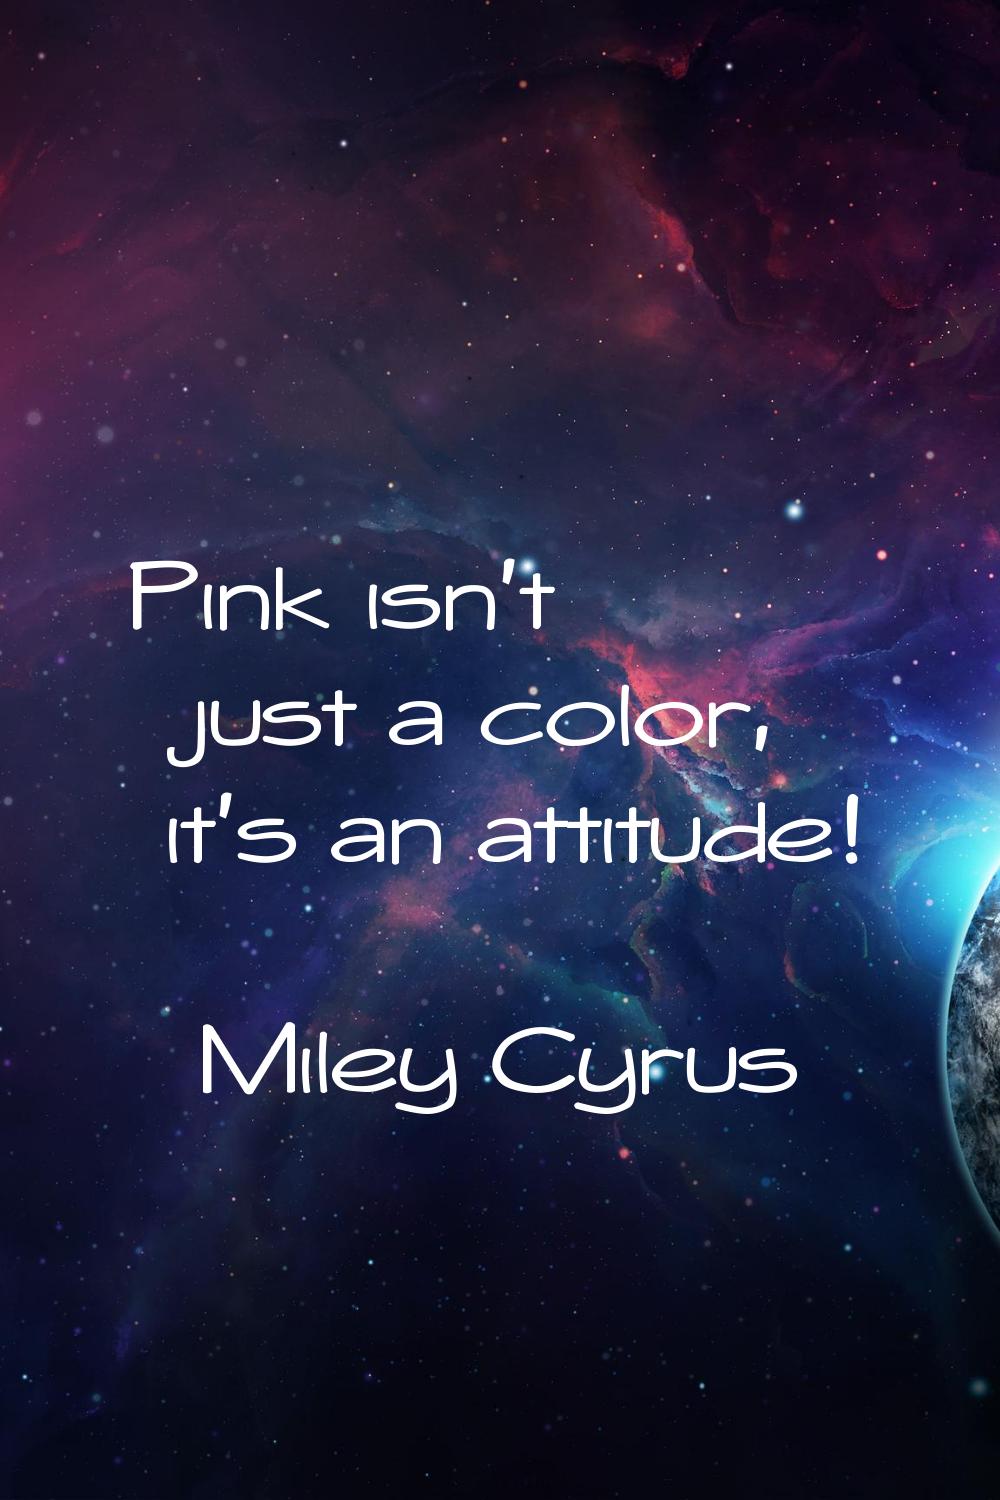 Pink isn't just a color, it's an attitude!